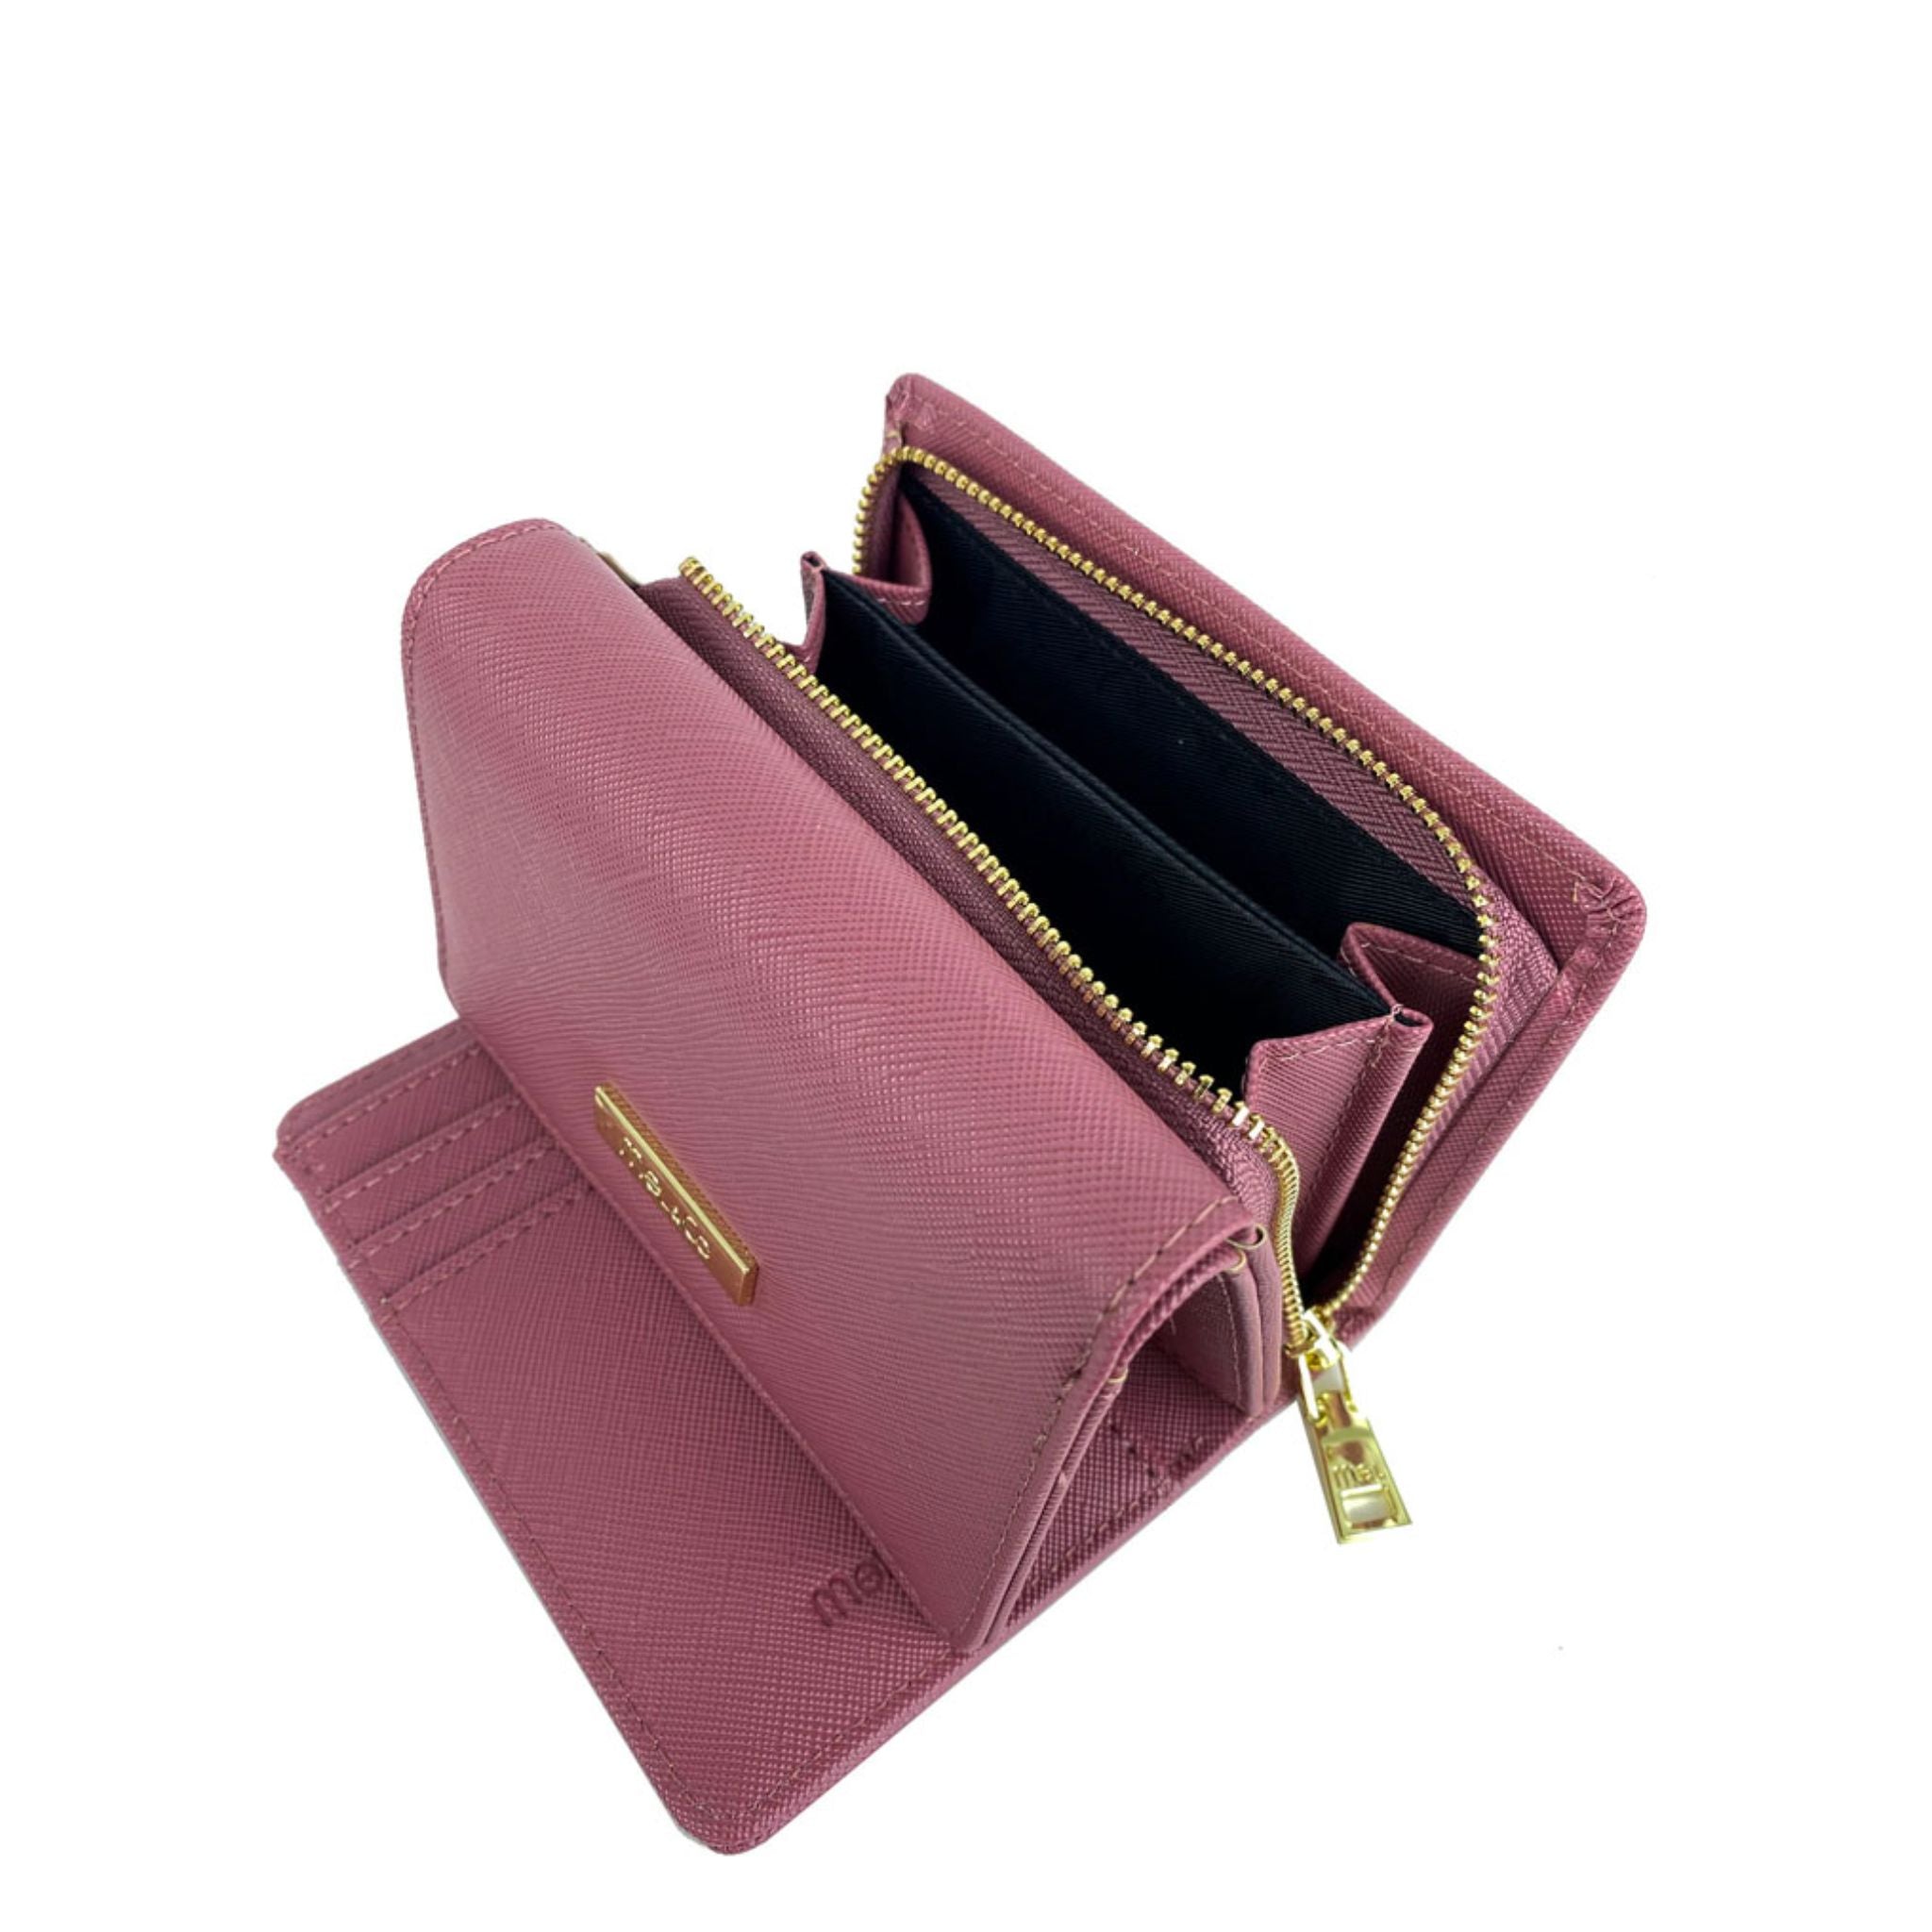 Mel&Co Saffiano Leatherette Tri-fold Wallet With Zipper Compartment Rose